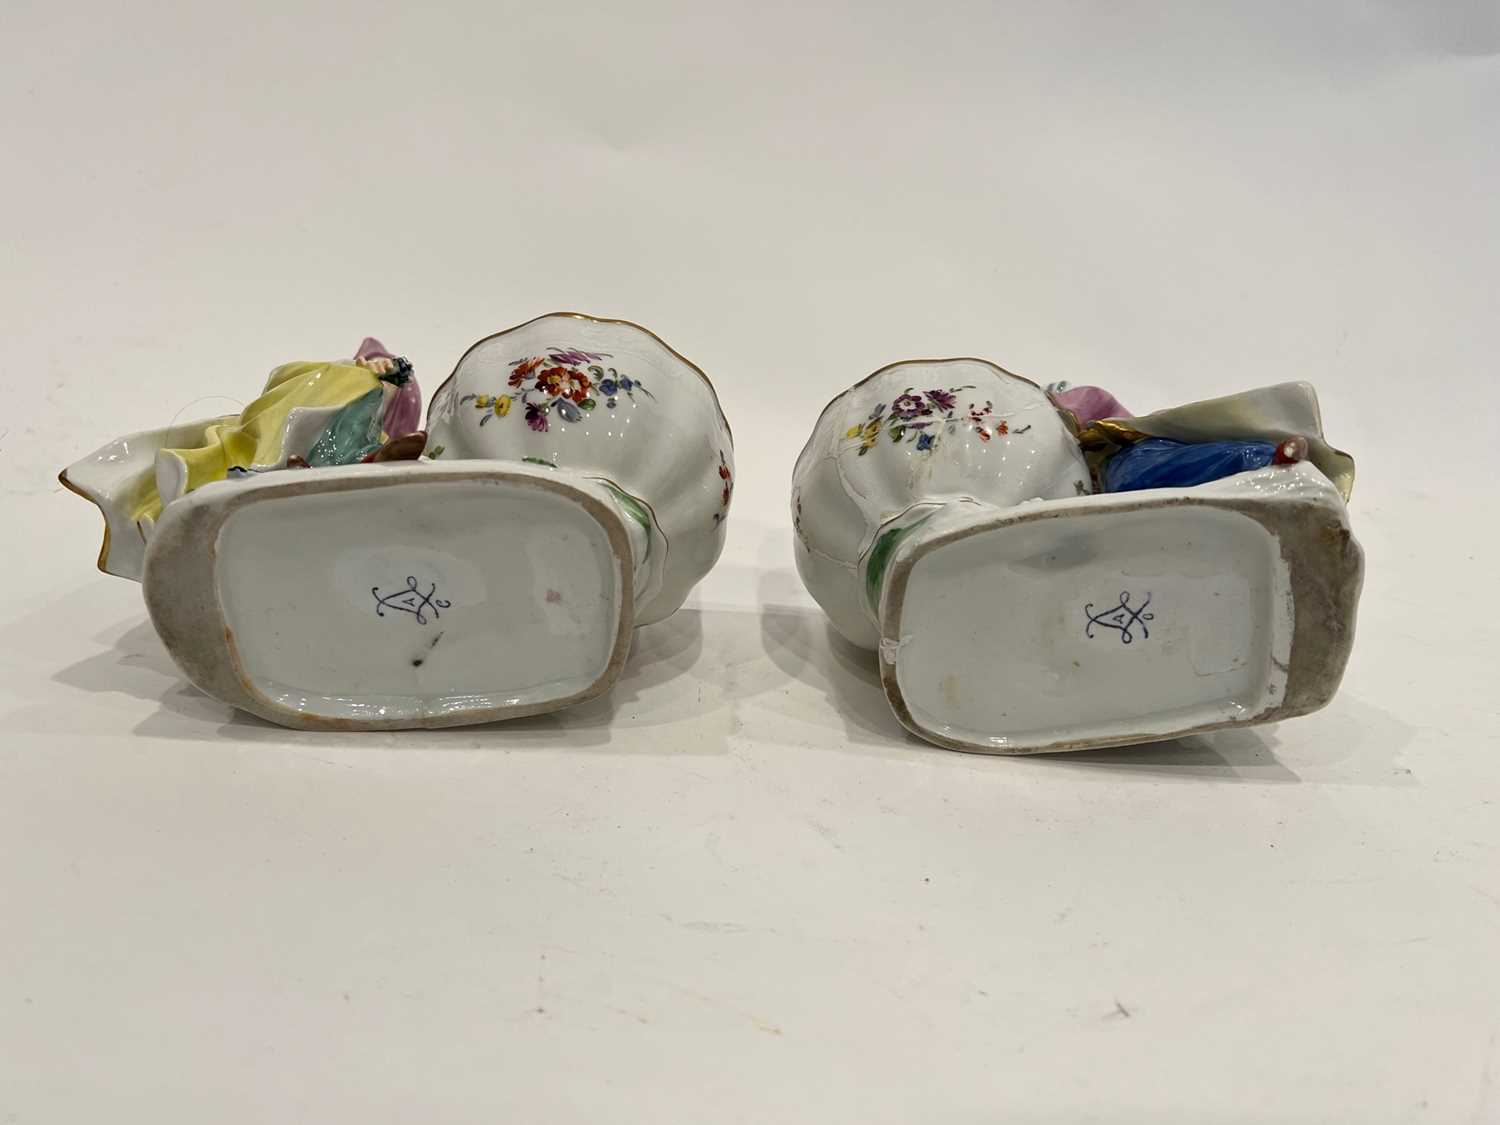 FOR THE OTTOMAN MARKET: A PAIR OF 19TH CENTURY PORCELAIN FIGURAL BON BON DISHES - Image 3 of 5